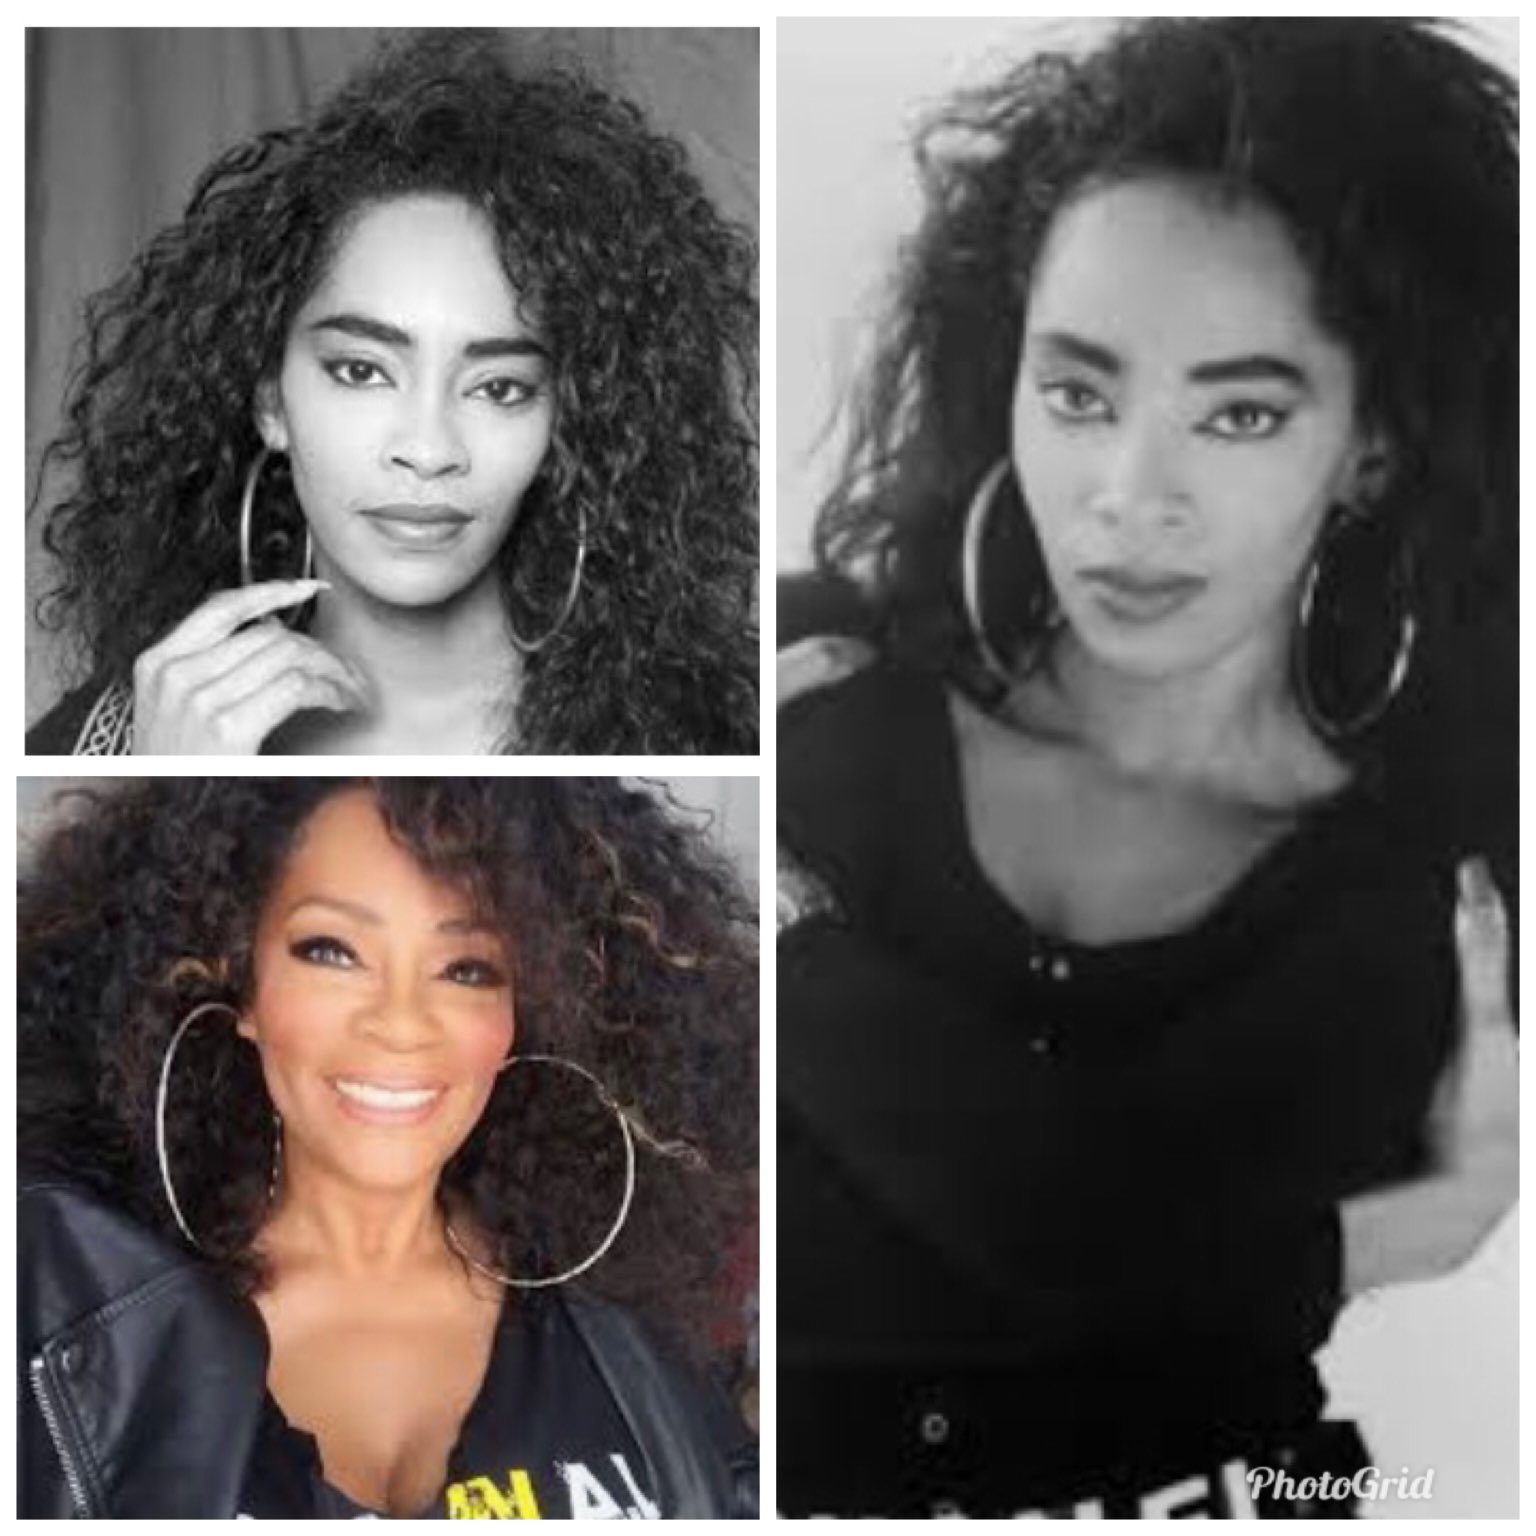 Happy Birthday today to Jody Watley born on this day January 30th, 1959 in Chicago, Illinois     